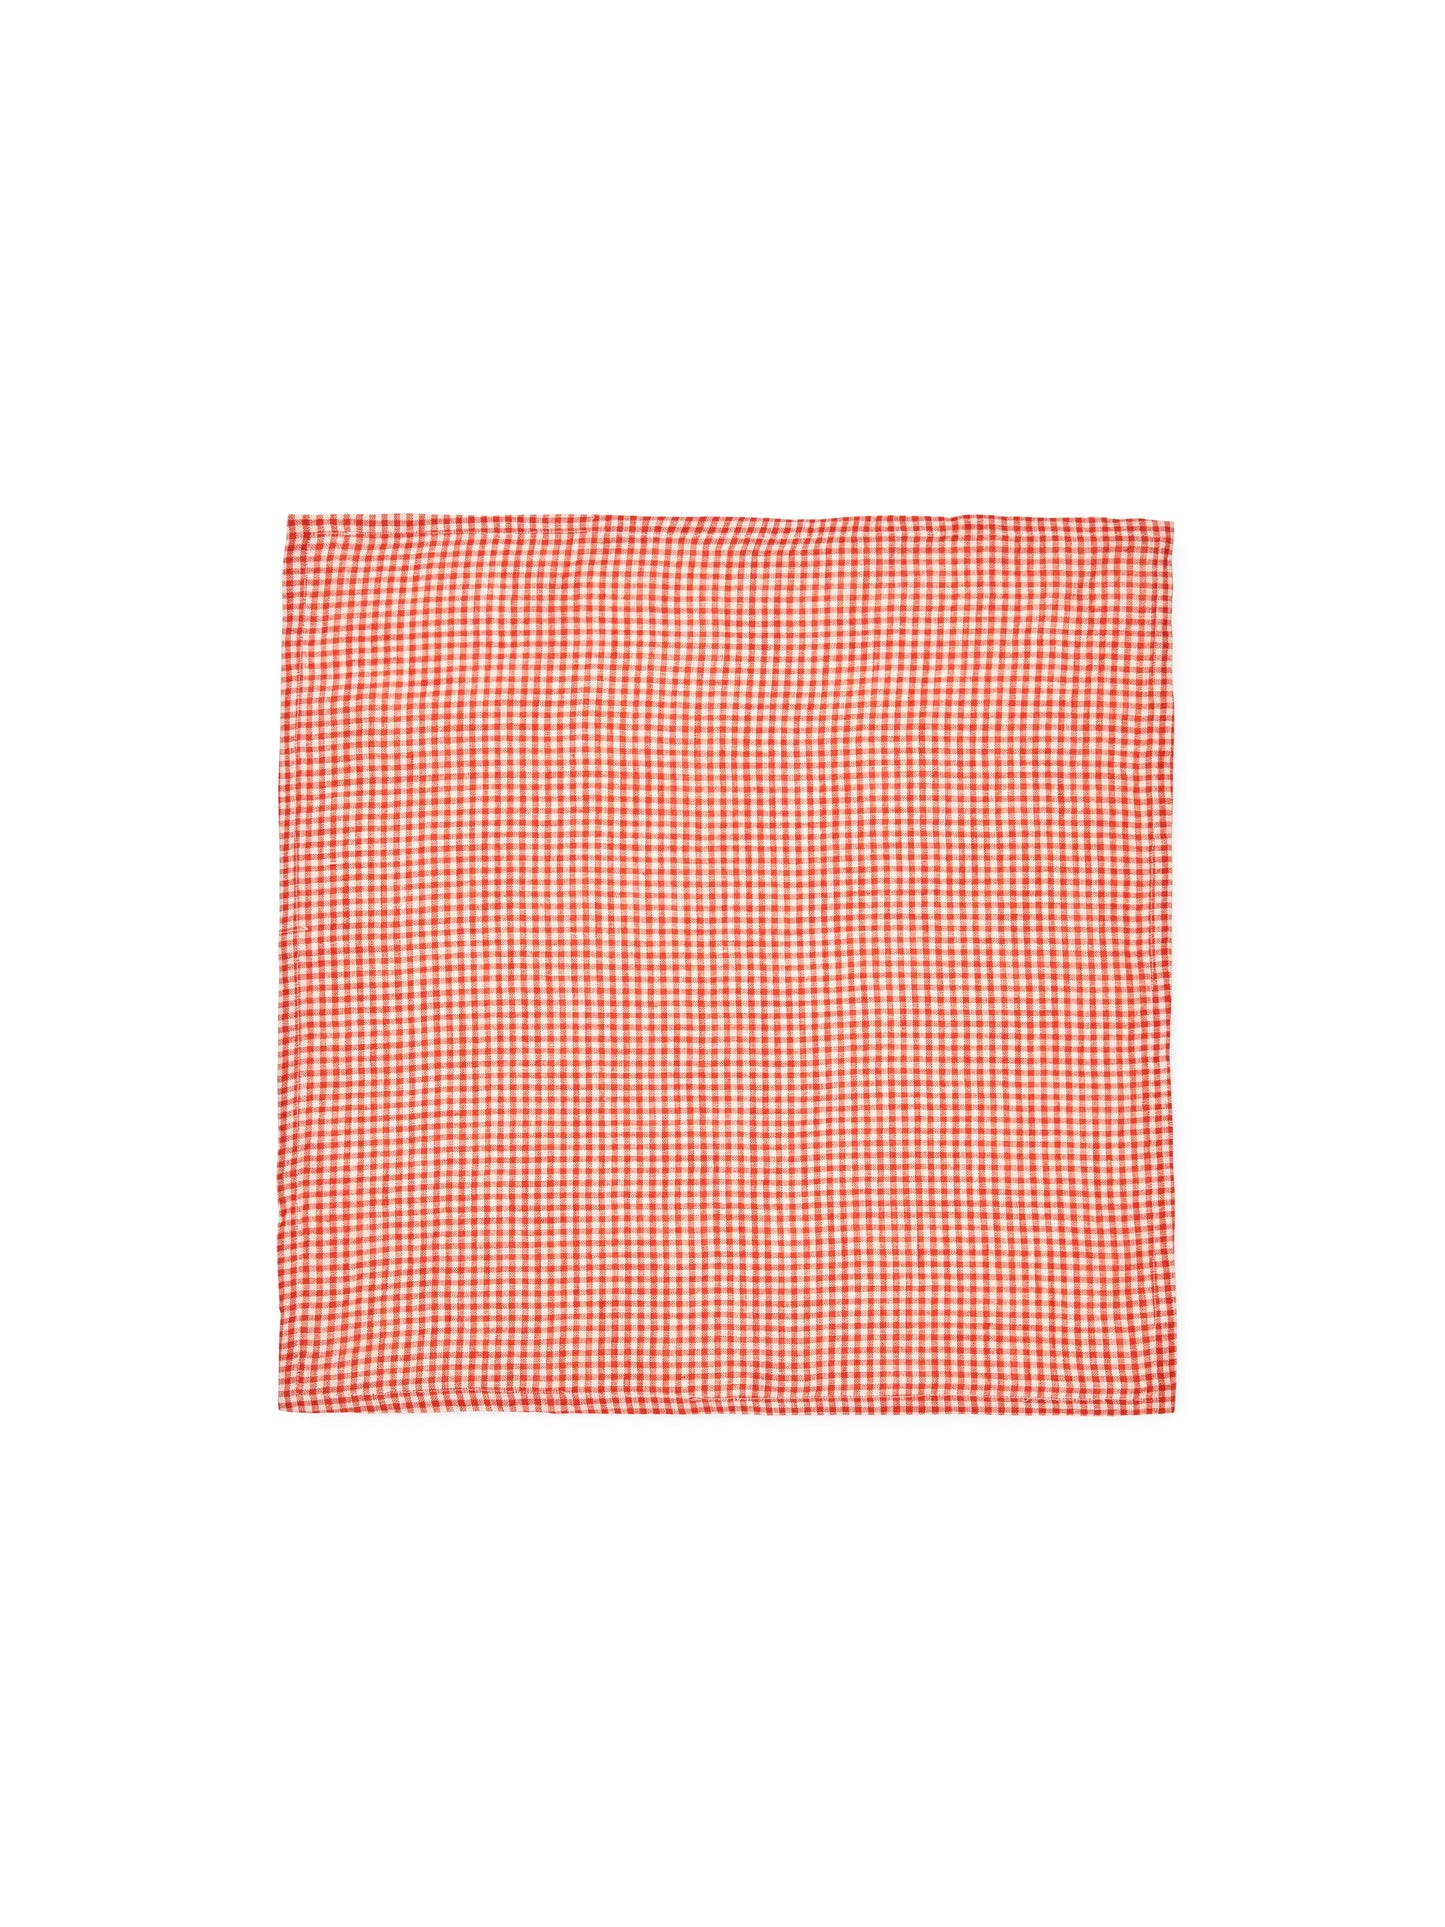 Lalaby - Eddie Scarf - Cherry check